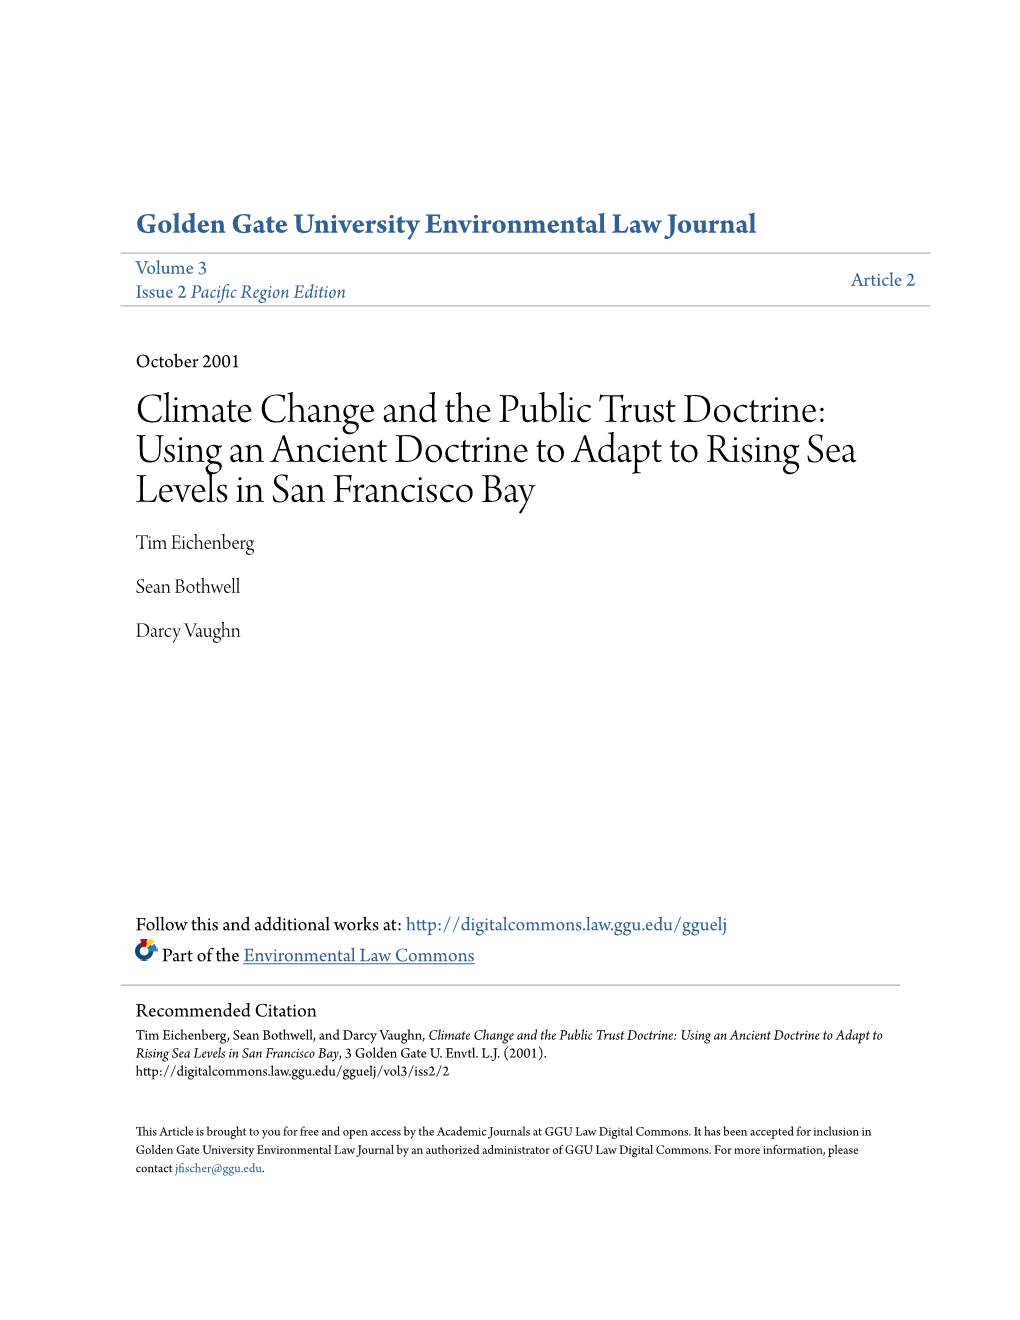 Climate Change and the Public Trust Doctrine: Using an Ancient Doctrine to Adapt to Rising Sea Levels in San Francisco Bay Tim Eichenberg